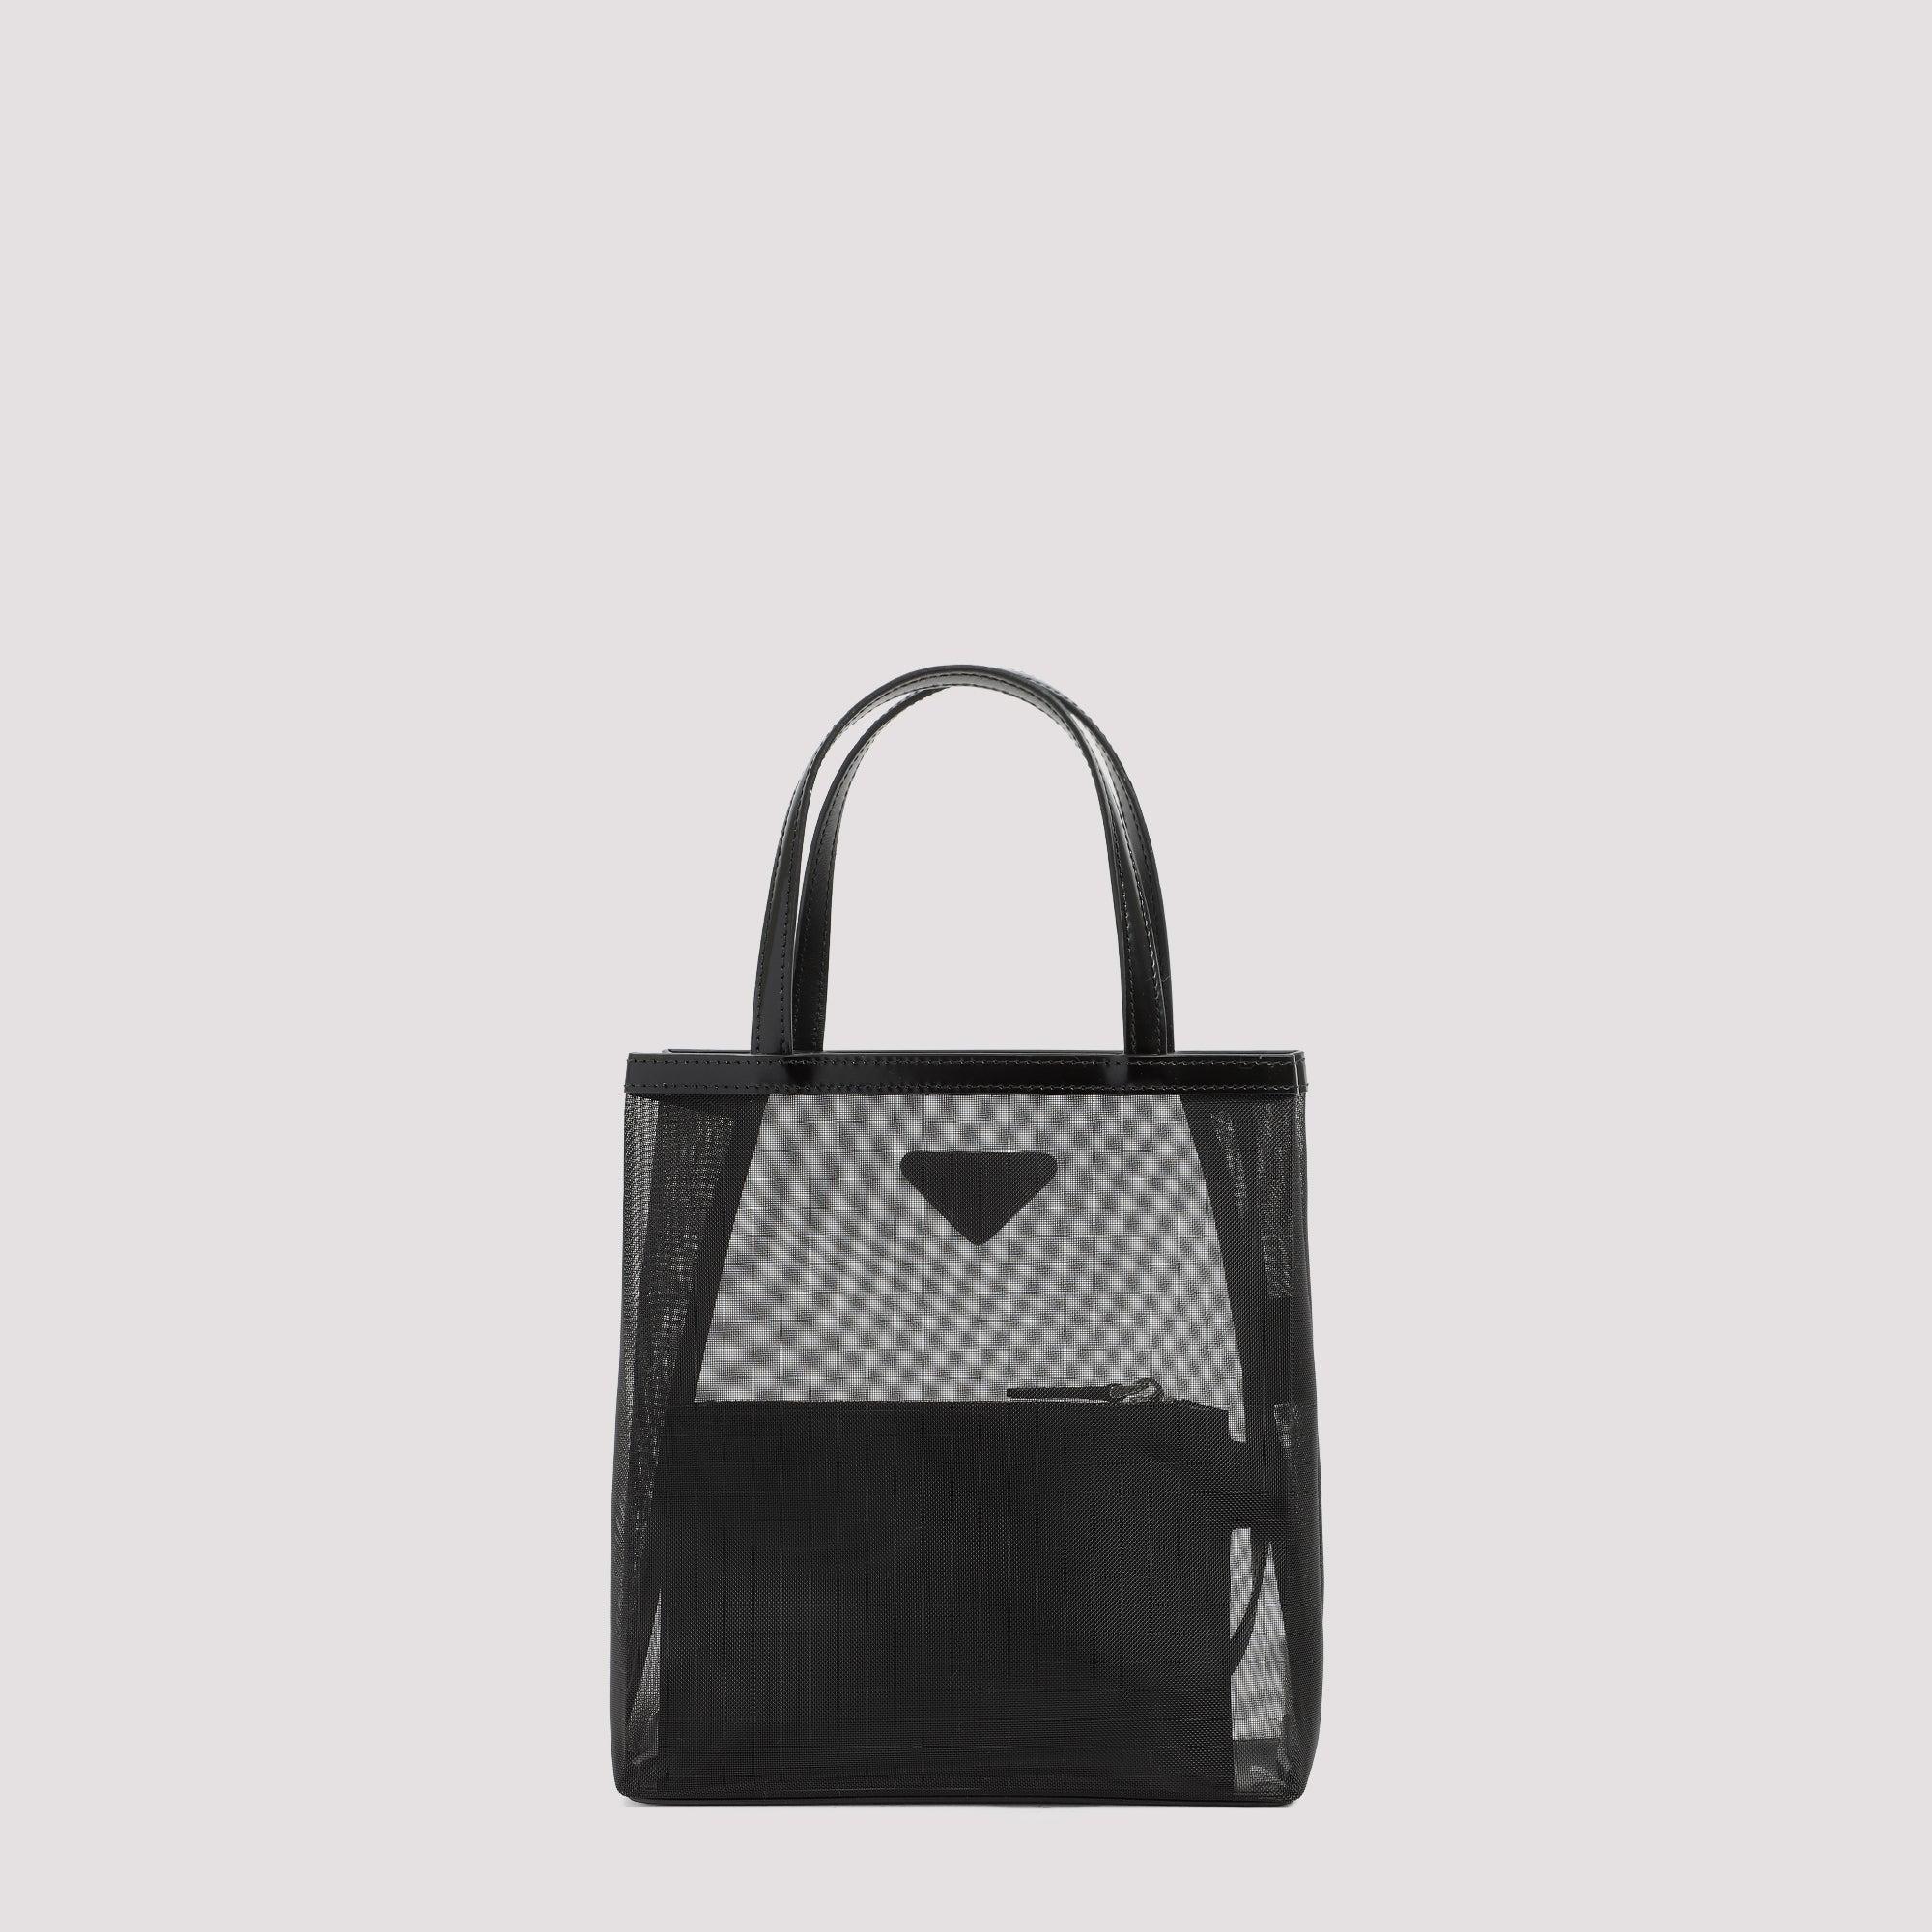 Prada Net And Leather Shopping Bag in Black | Lyst